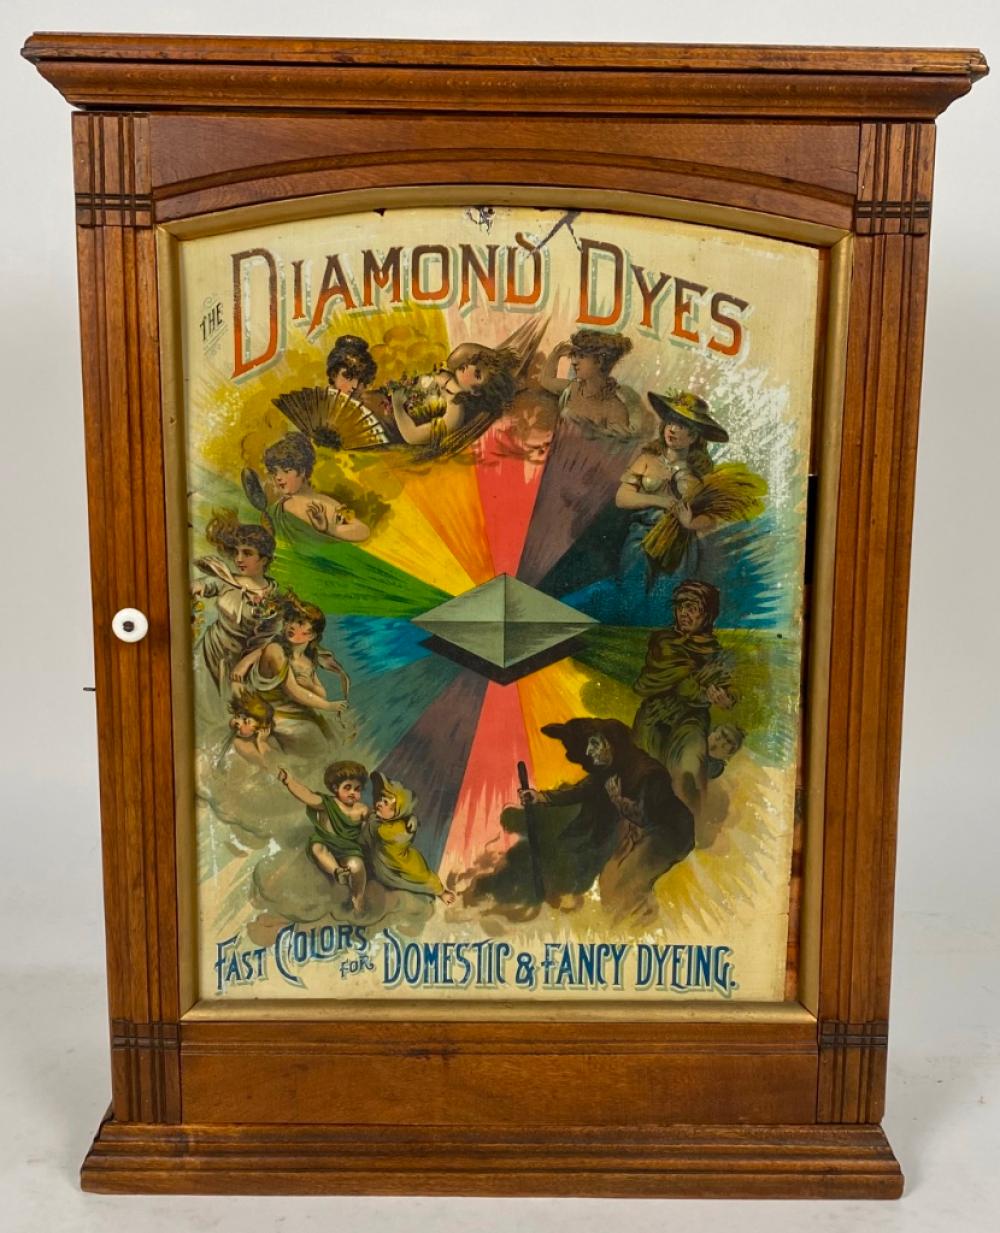 DIAMOND DYES COMPANY GENERAL STORE